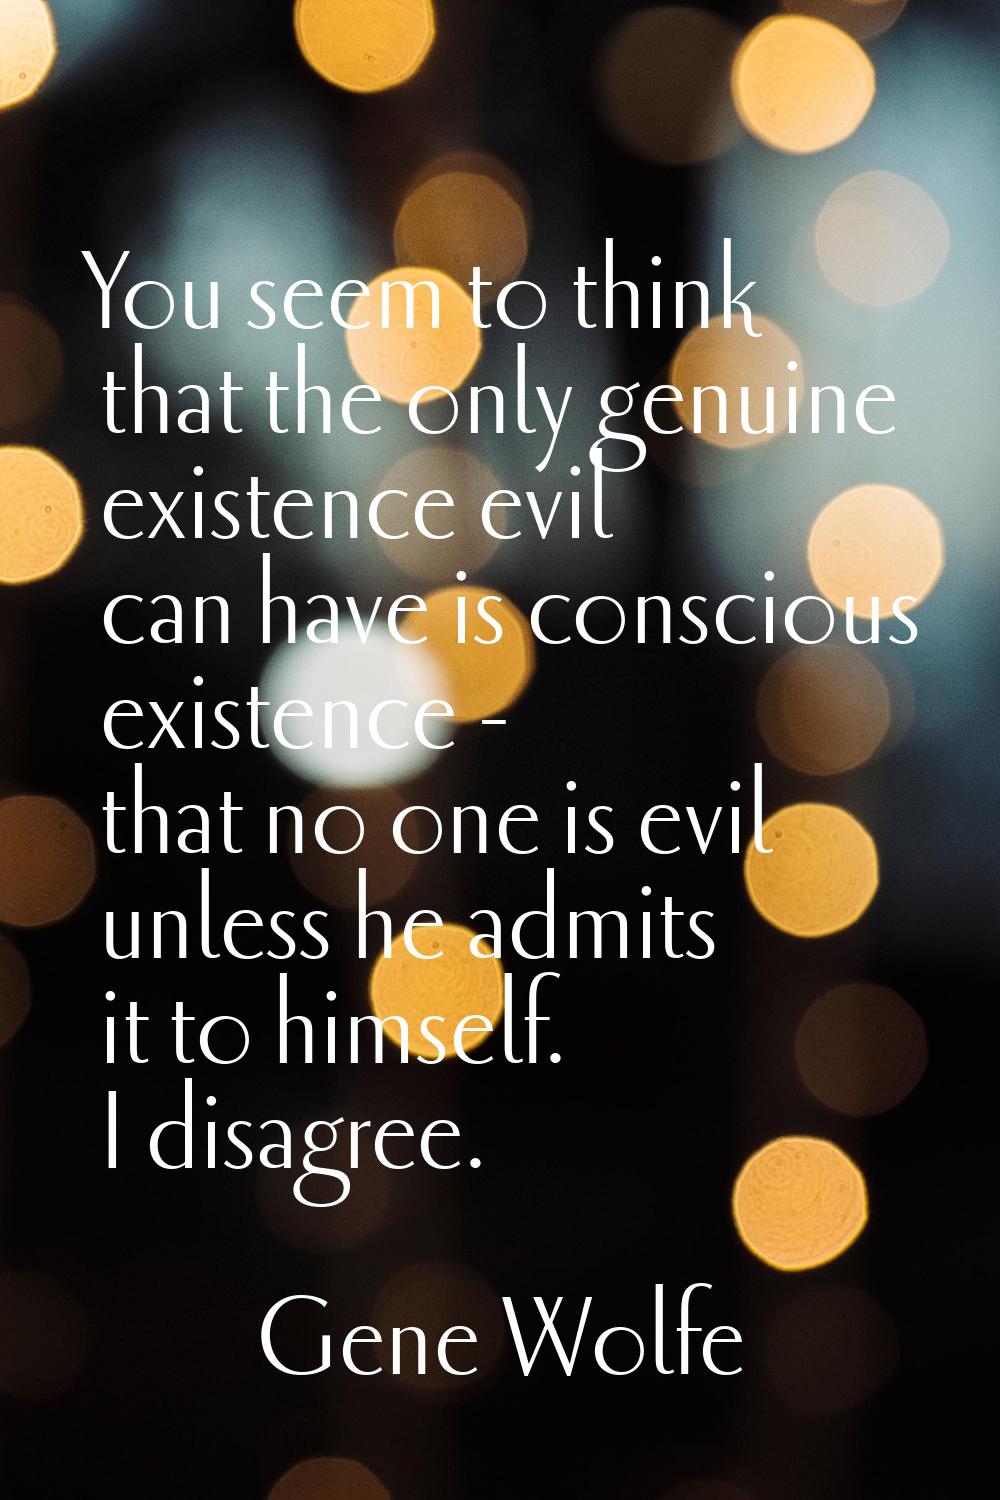 You seem to think that the only genuine existence evil can have is conscious existence - that no on